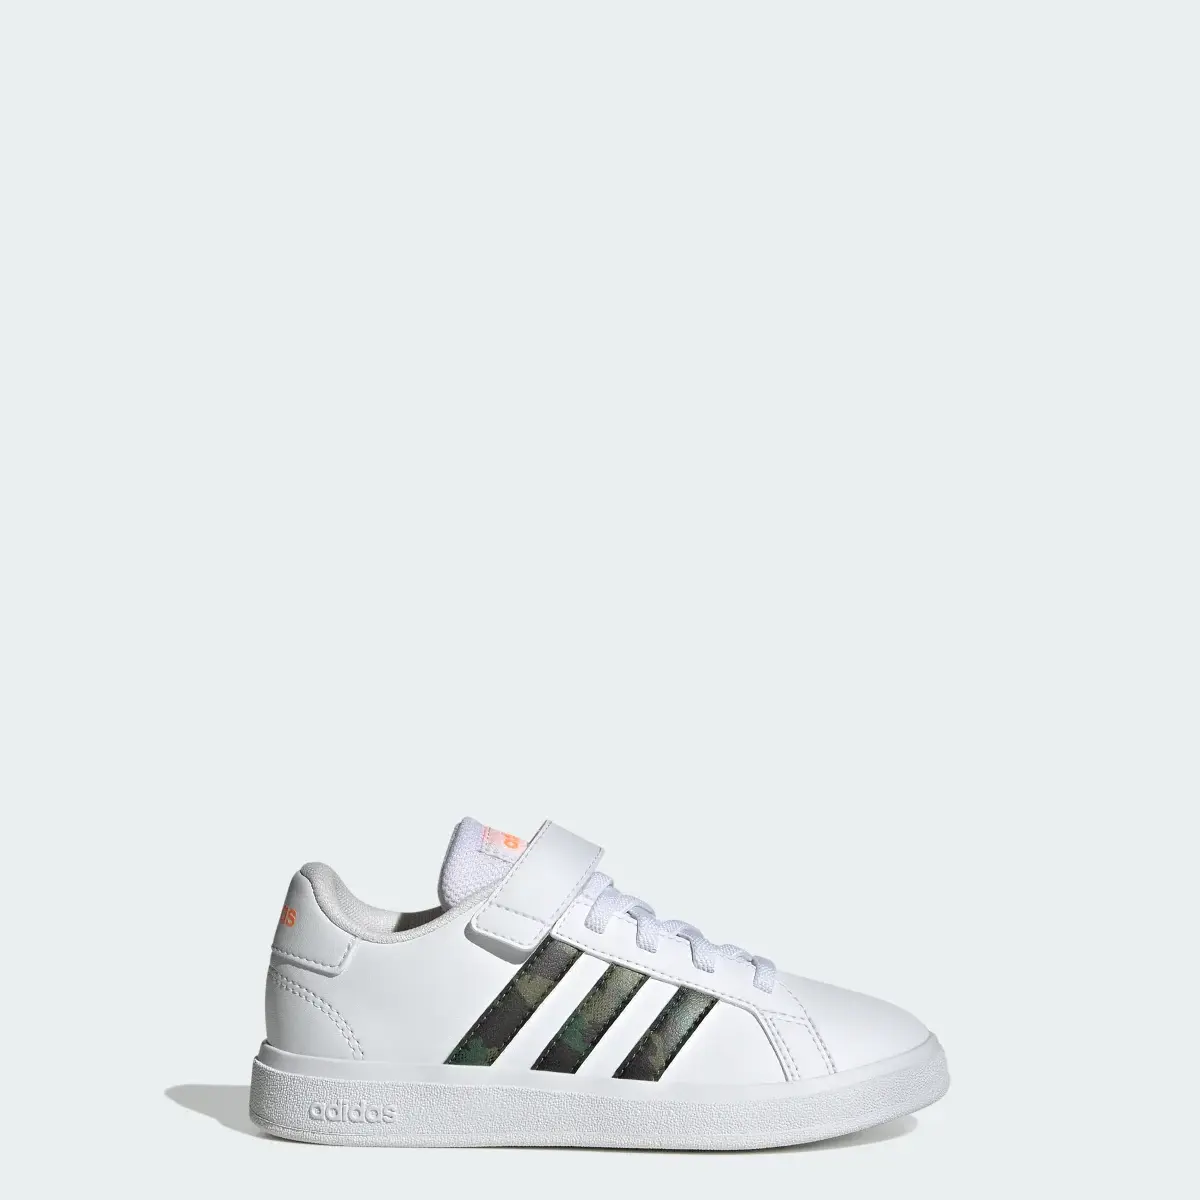 Adidas Grand Court Lifestyle Court Elastic Lace and Top Strap Shoes. 1